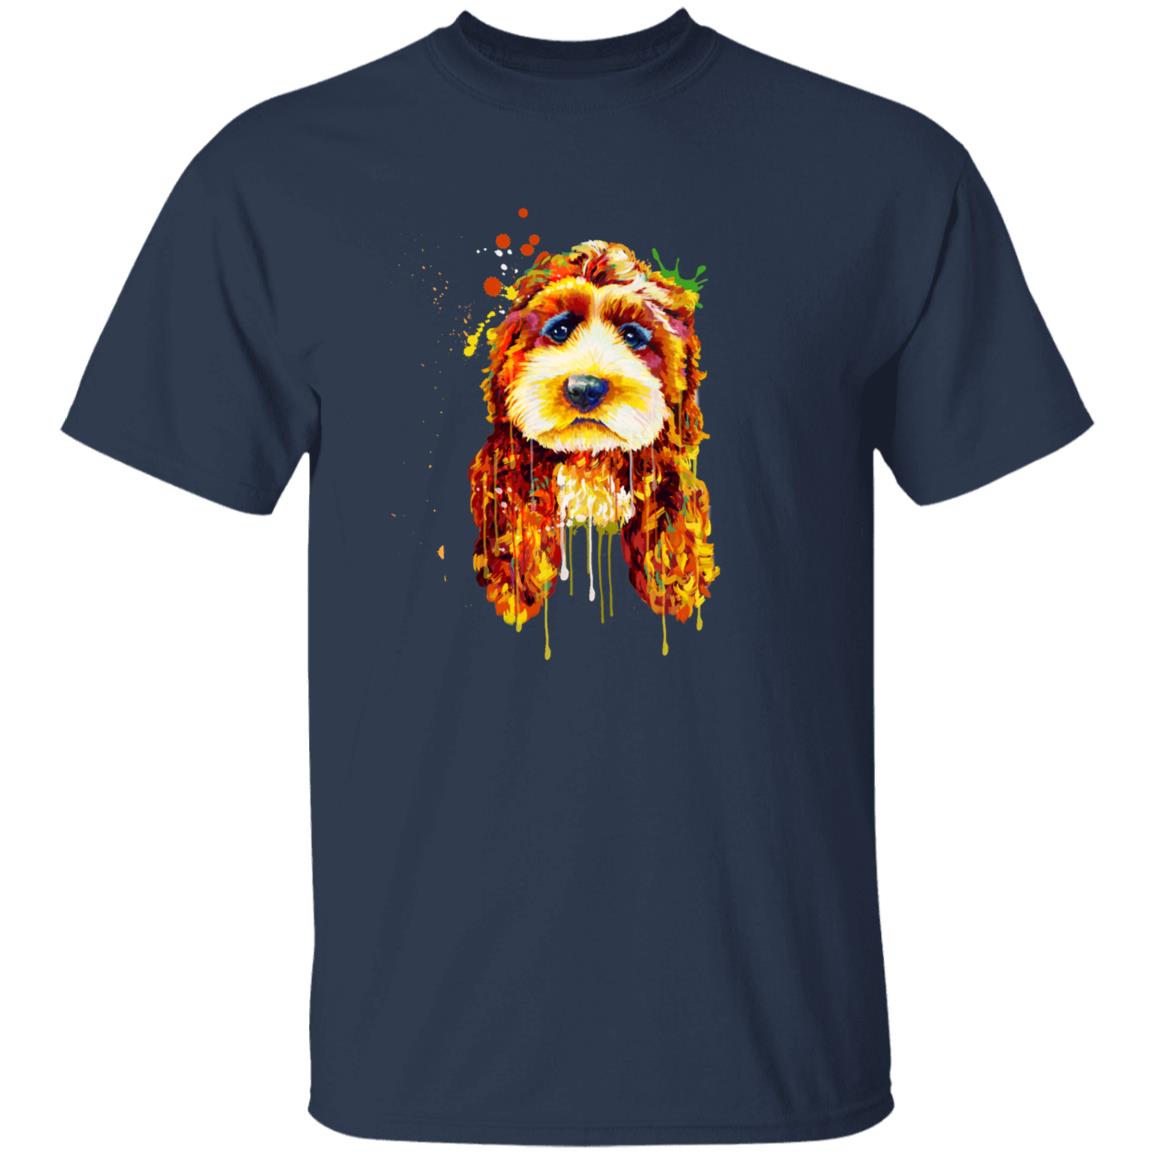 Watercolor painting Poodle dog Unisex shirt S-2XL black navy dark heather-Navy-Family-Gift-Planet